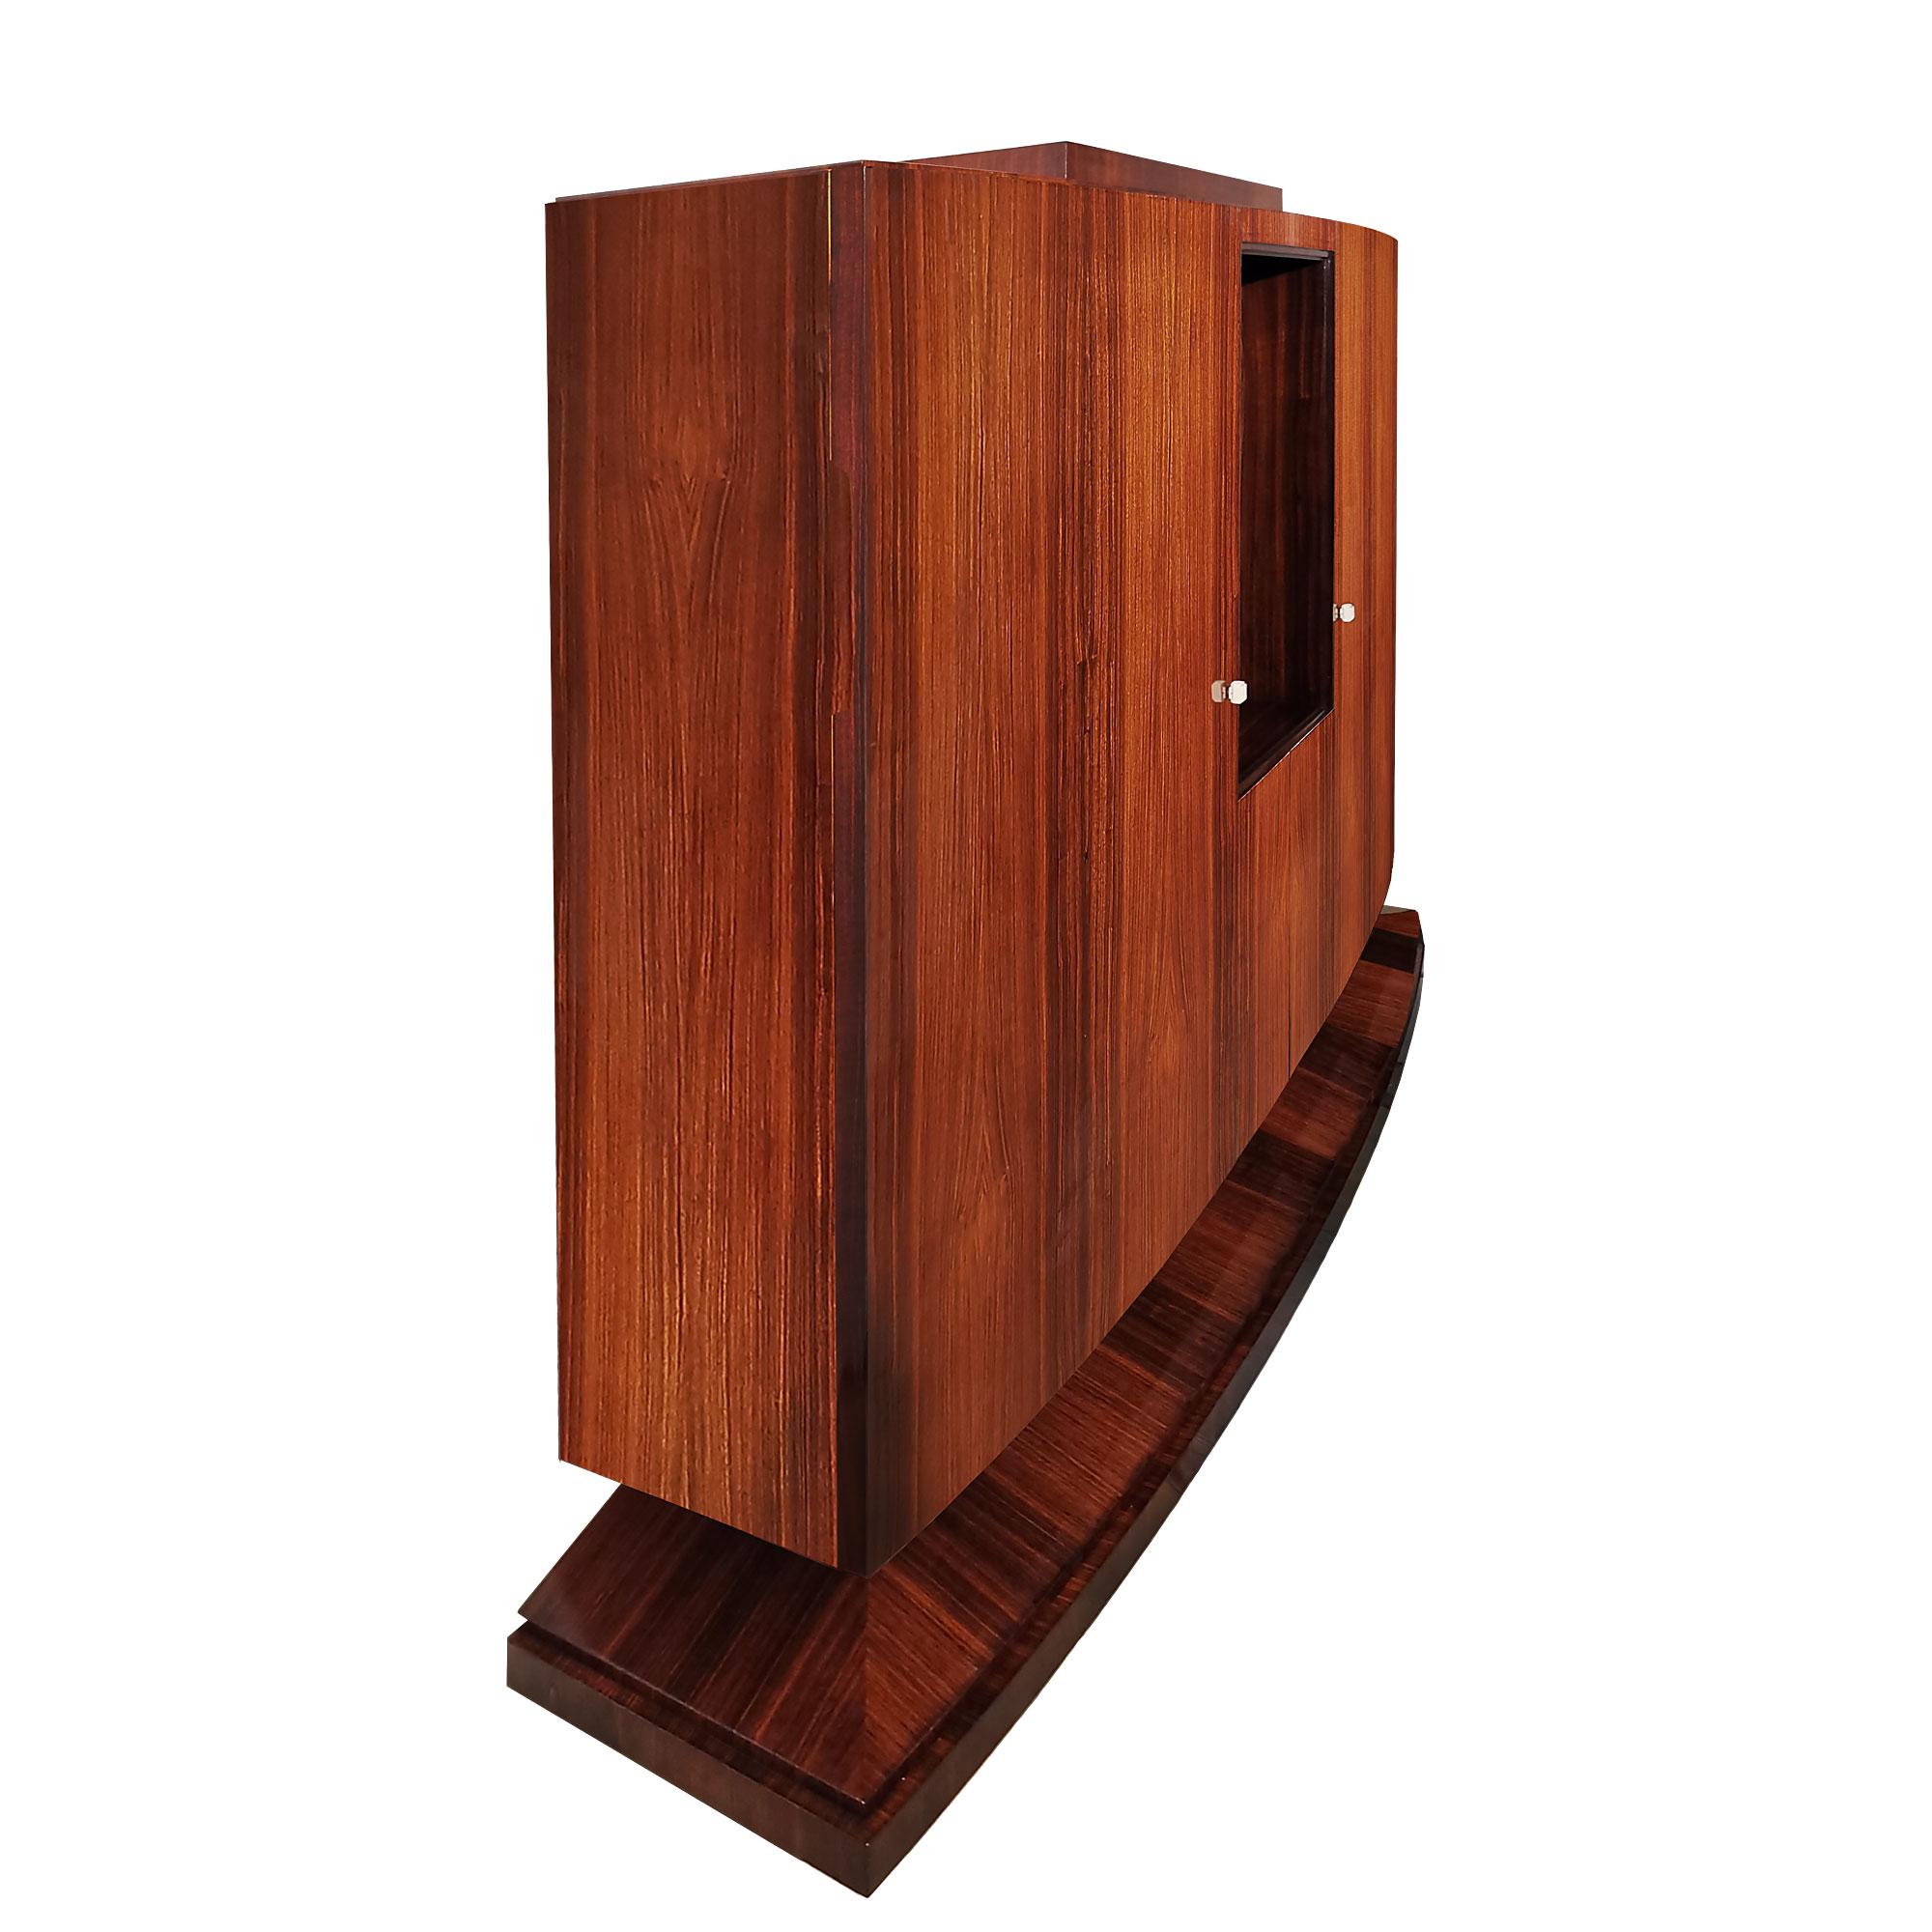 Extraordinary Art Deco storage cabinet-bookcase, solid mahogany with mahogany veneer outside and sycamore inside with a wide base, french polish. Two curved doors with shelves inside and a space for strongbox, nickel plated metal hinges and locks,